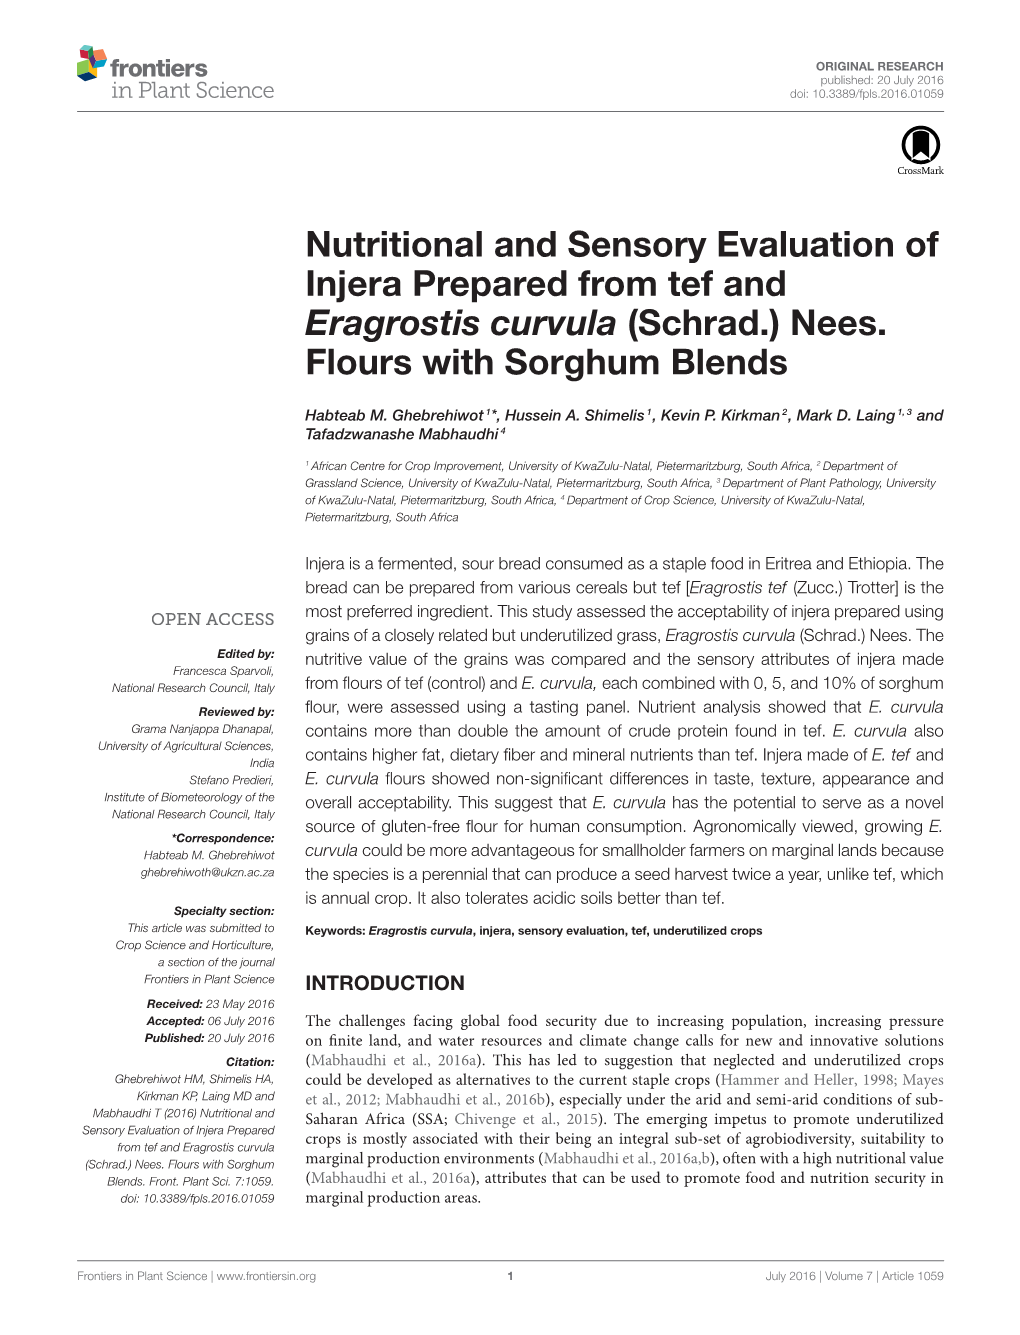 Nutritional and Sensory Evaluation of Injera Prepared from Tef and Eragrostis Curvula (Schrad.) Nees